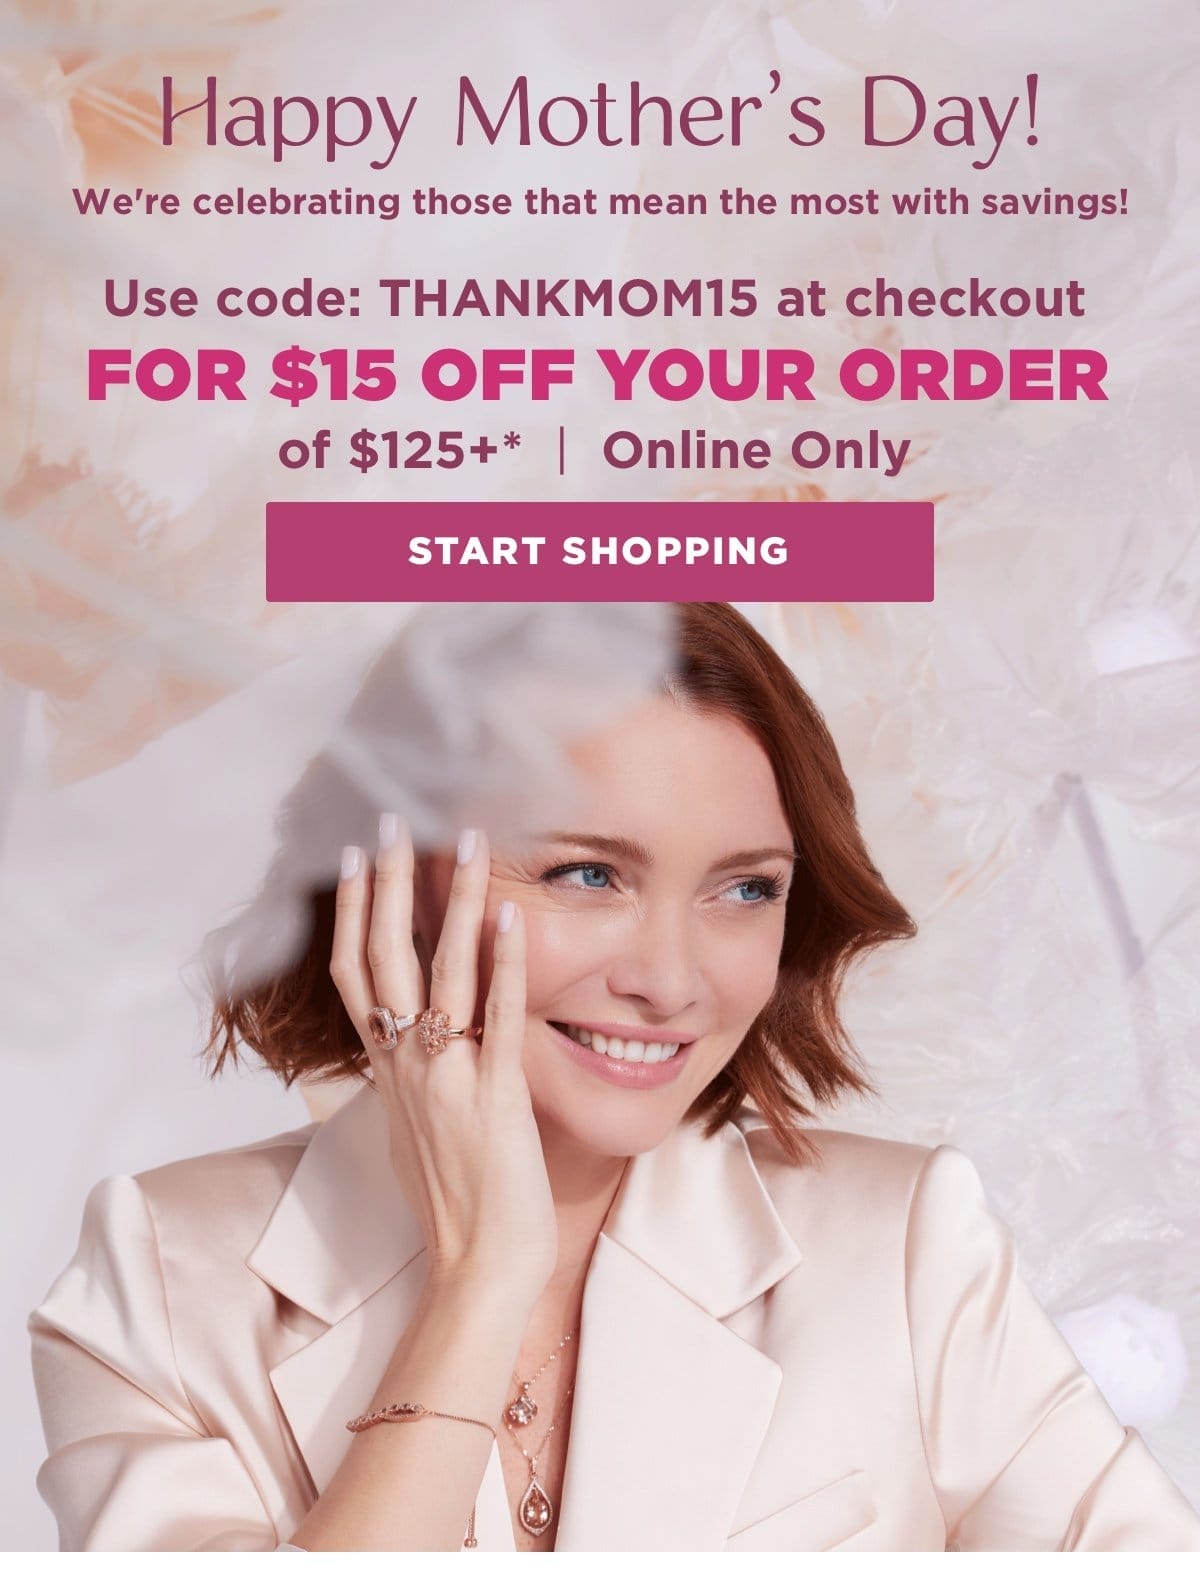 Use code: THANKMOM15 at checkout for \\$15 off your order of \\$125!*